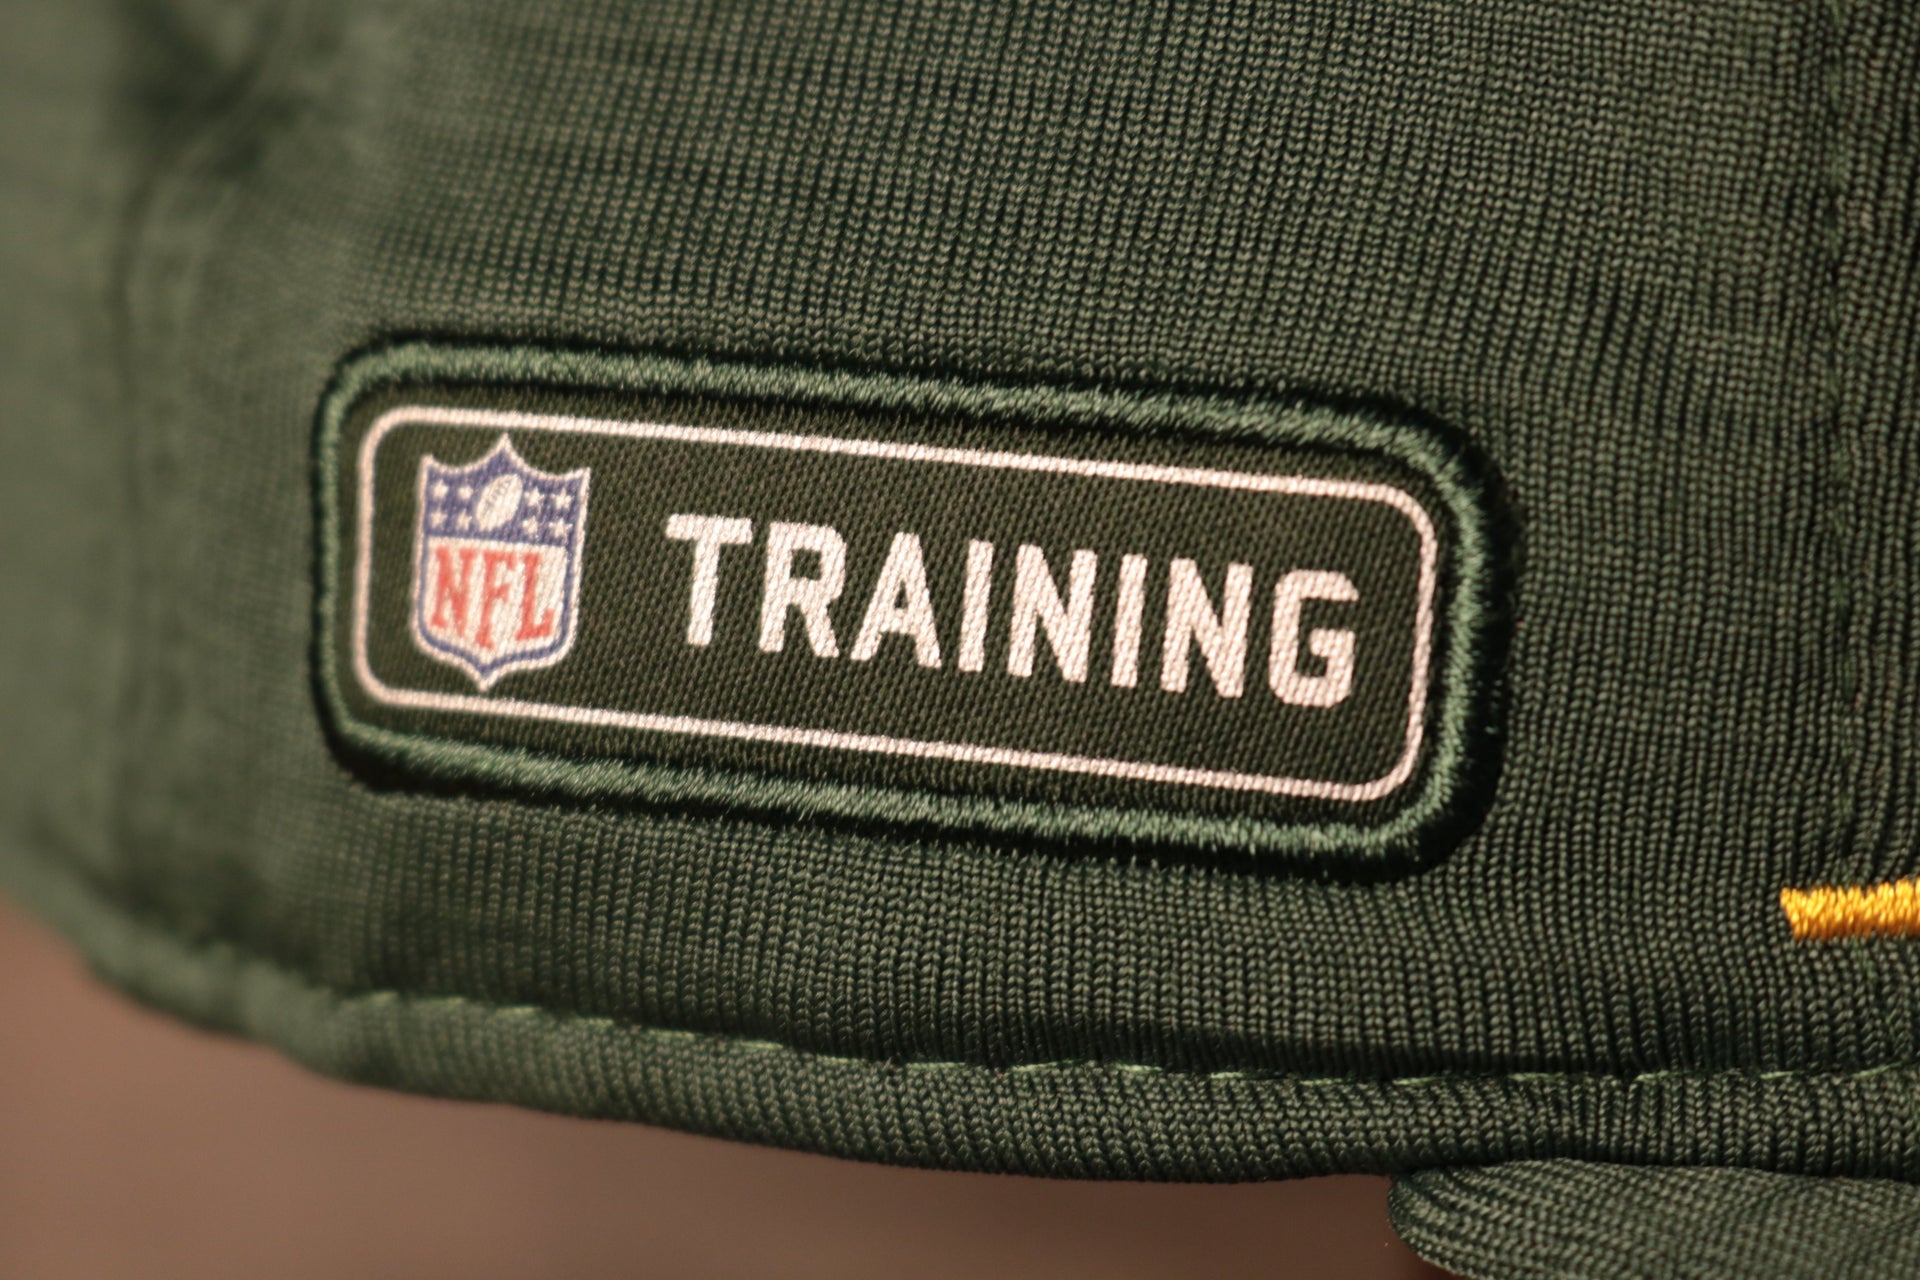 The nfl training patch is green Packers 2020 Training Camp Snapback Hat | Green Bay Packers 2020 On-Field Green Training Camp Snap Cap